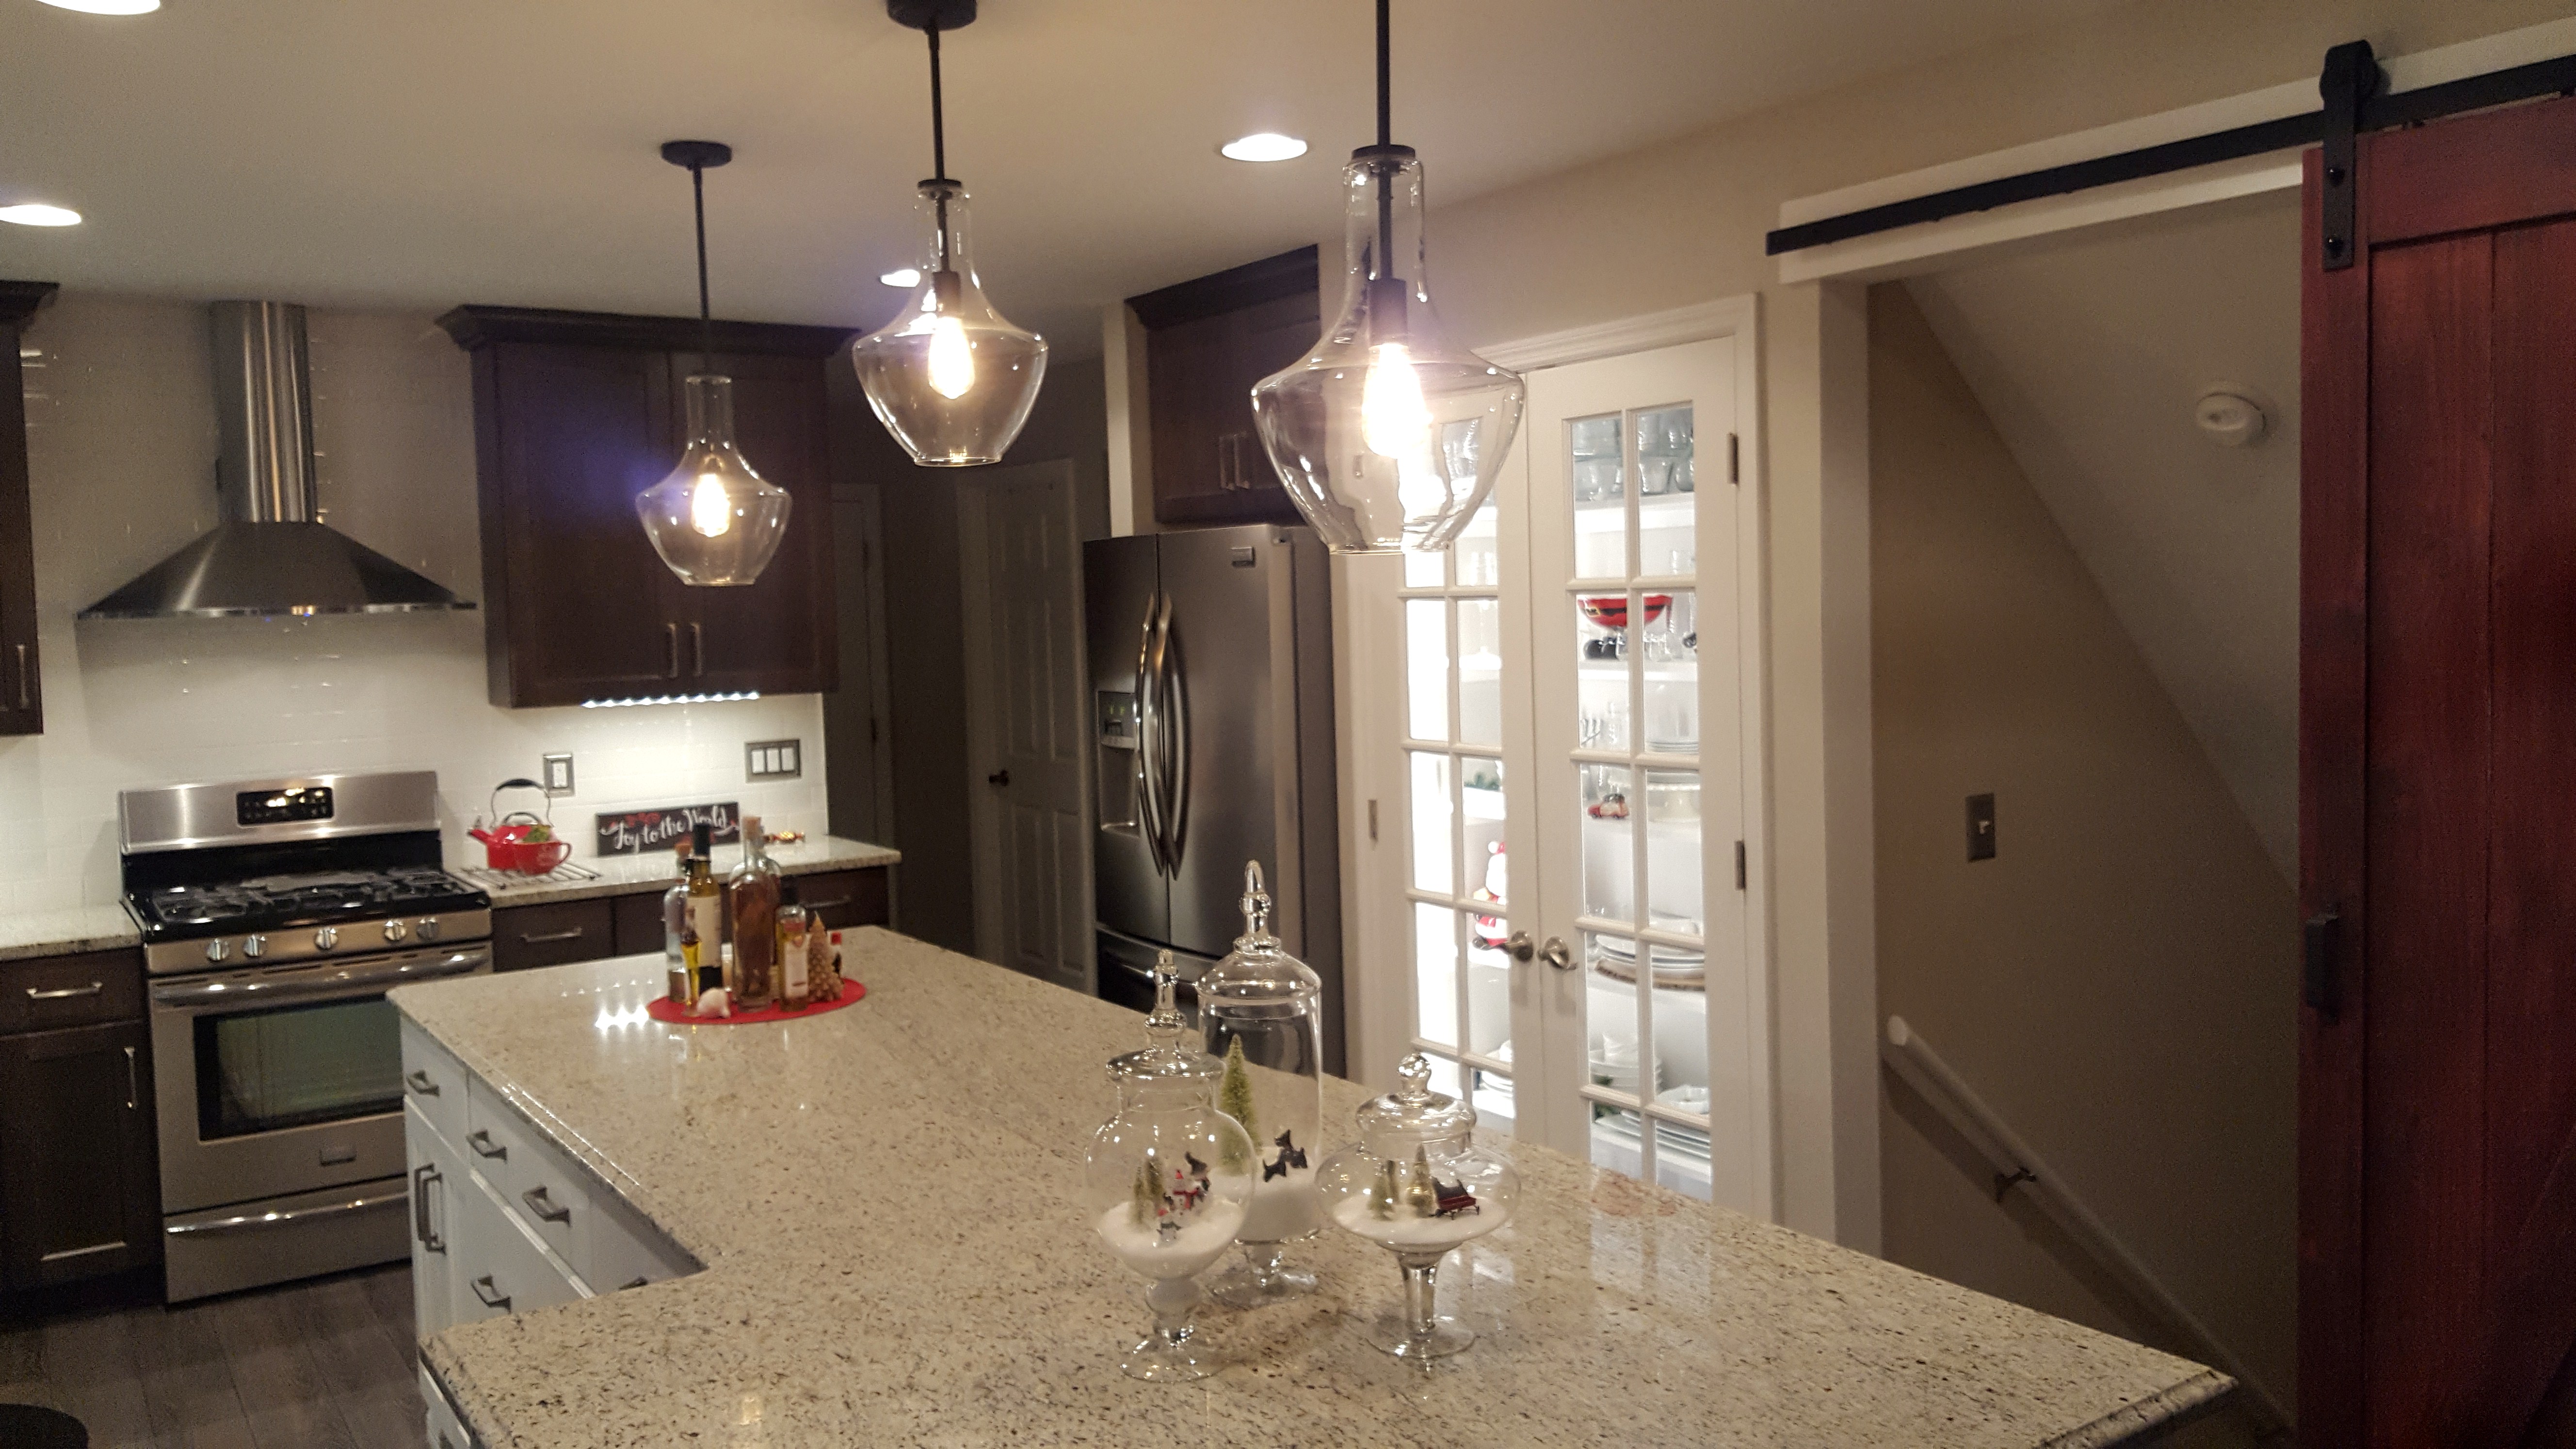 A 10 Foot Island And Dishes On Display A Kitchen Remodel For The